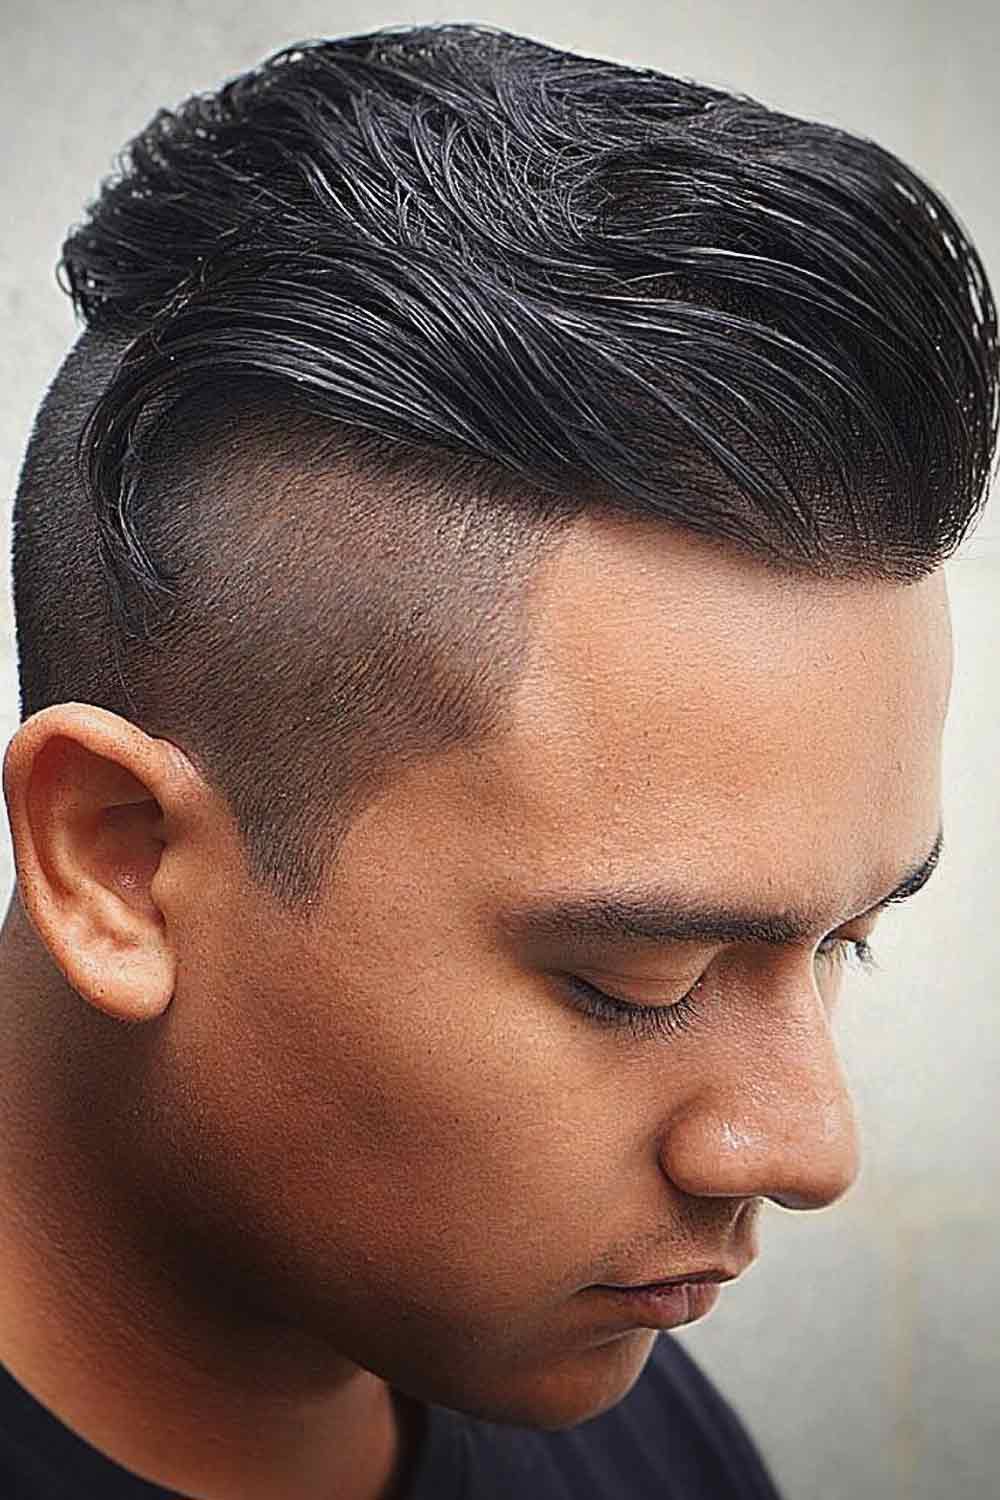 Cutting Edge: A Round-Up of the Best Mens Haircuts for Round Faces